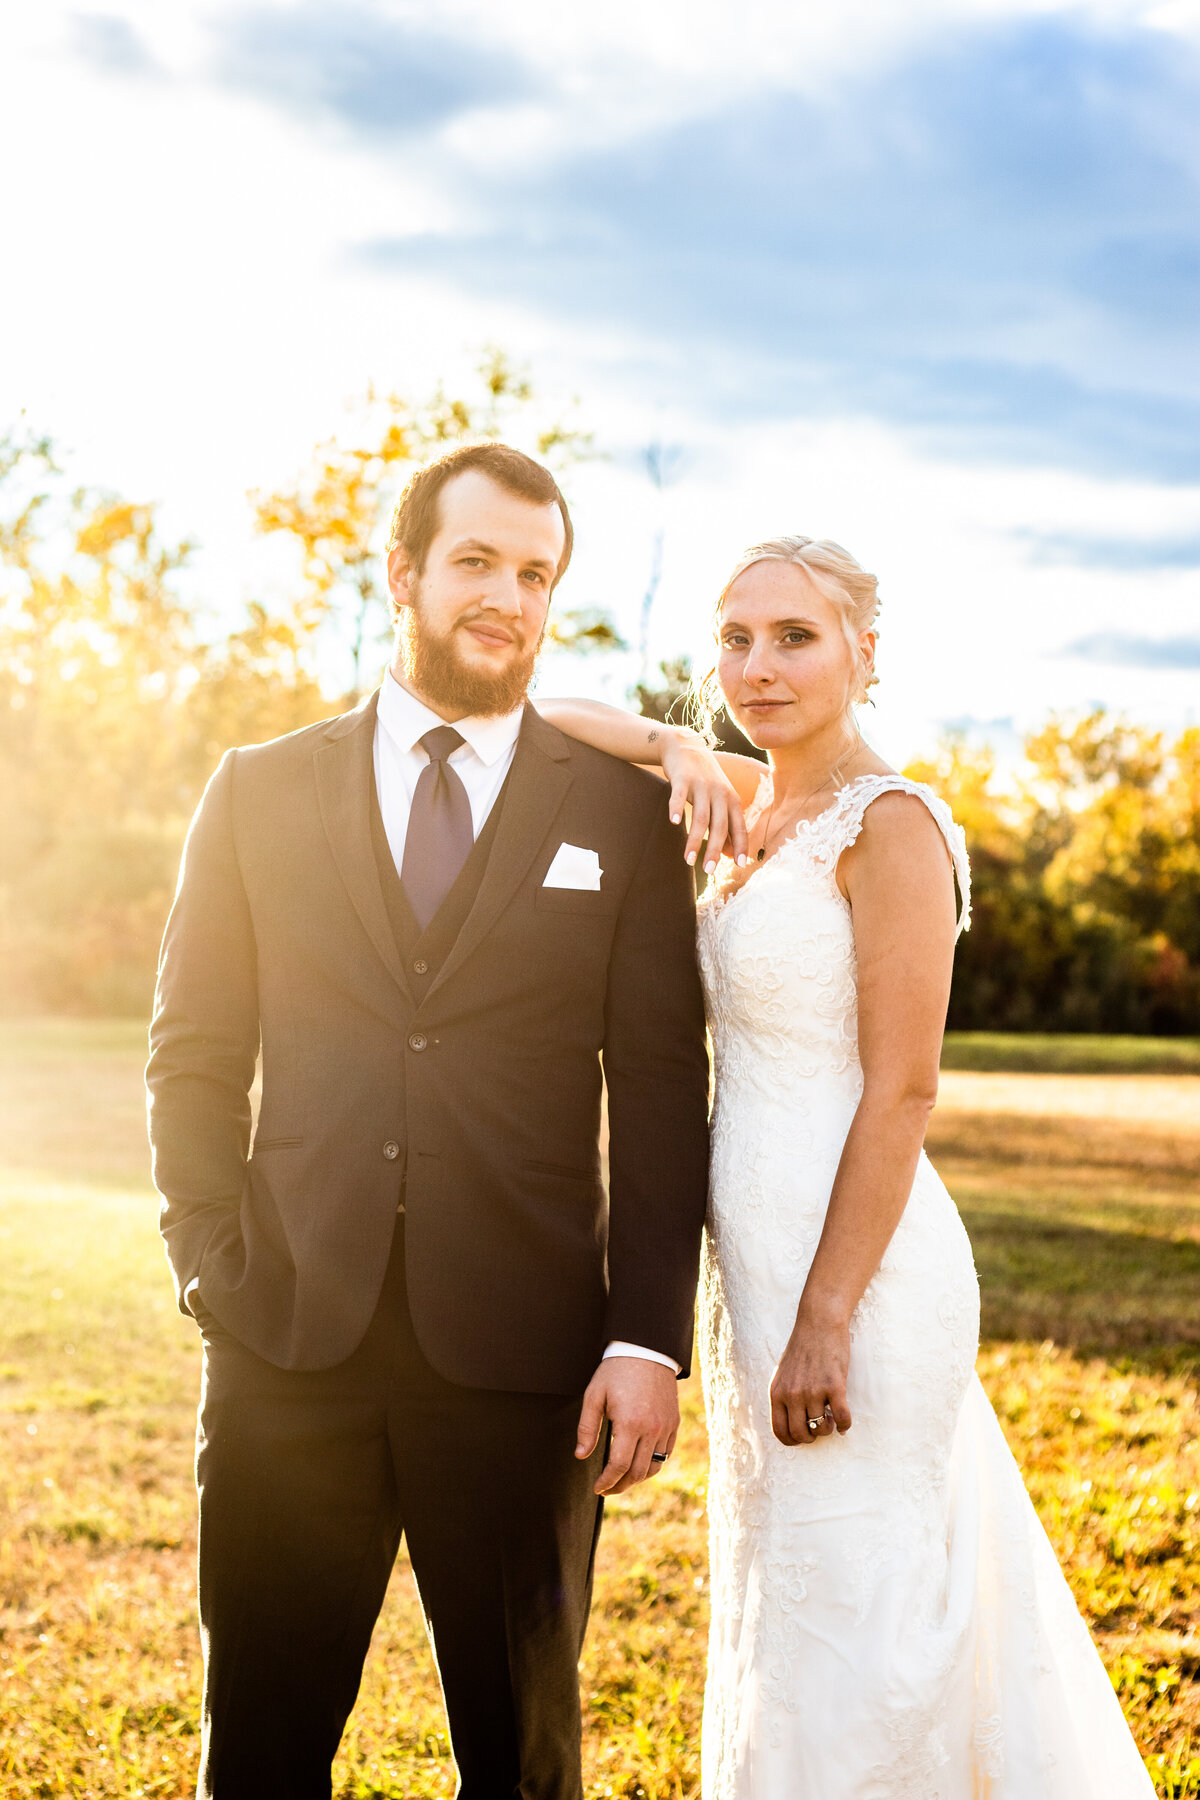 Bride and groom portraits shot in Midland, Michigan. Photo by Devin Ramon Photography.